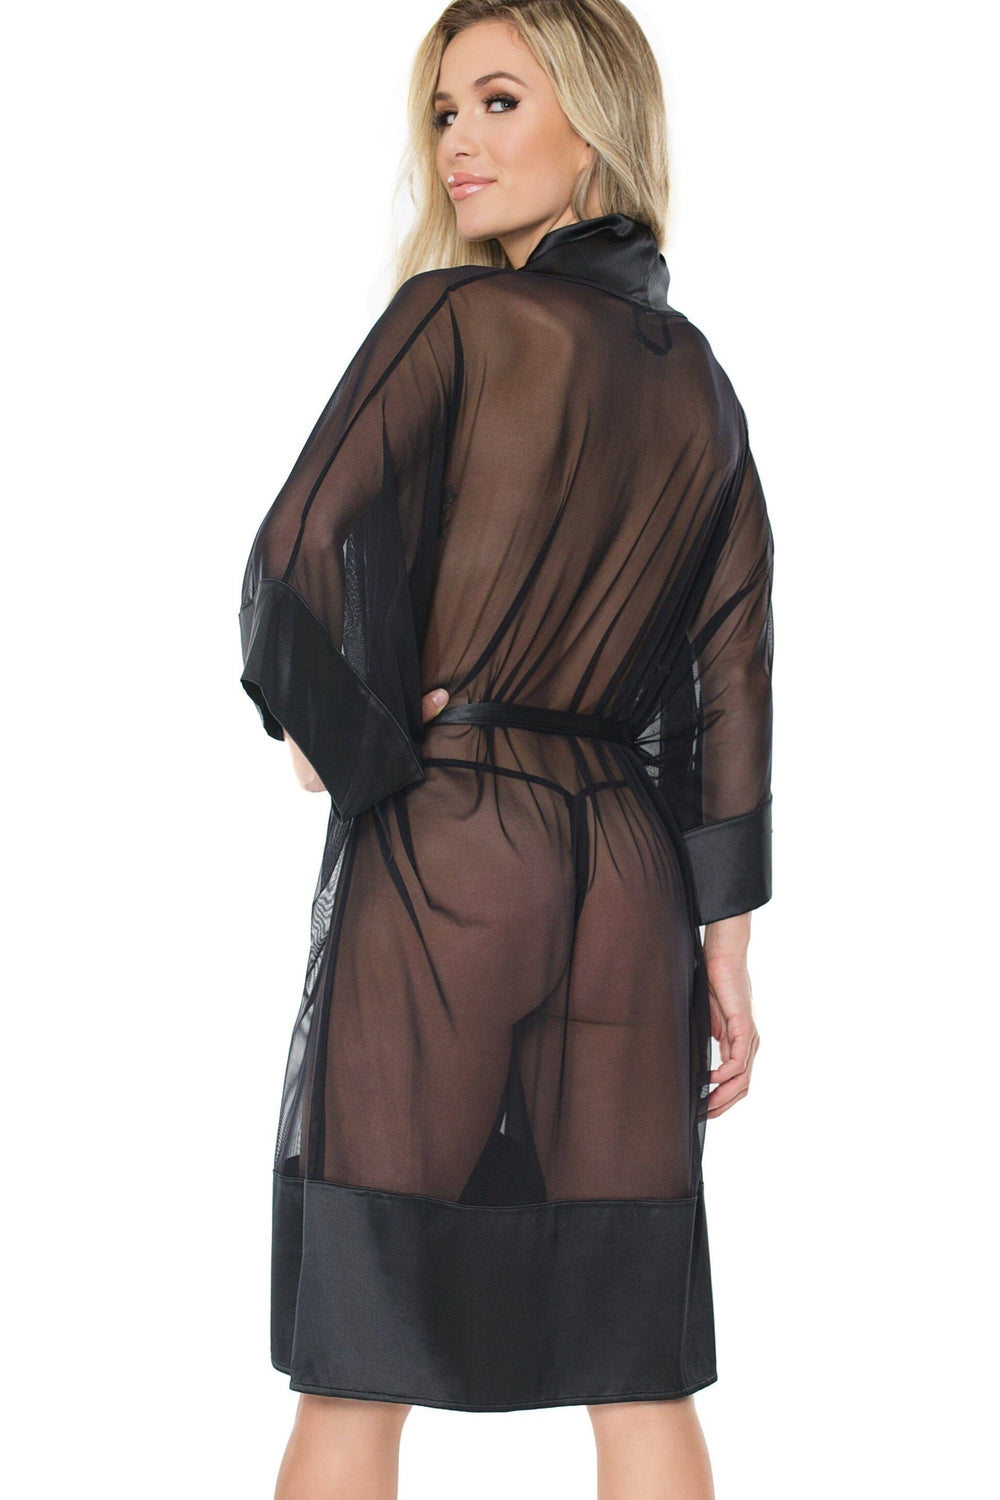 Sheer Kimono Style Robe-Gowns + Robes-Coquette-Black-O/S-SEXYSHOES.COM